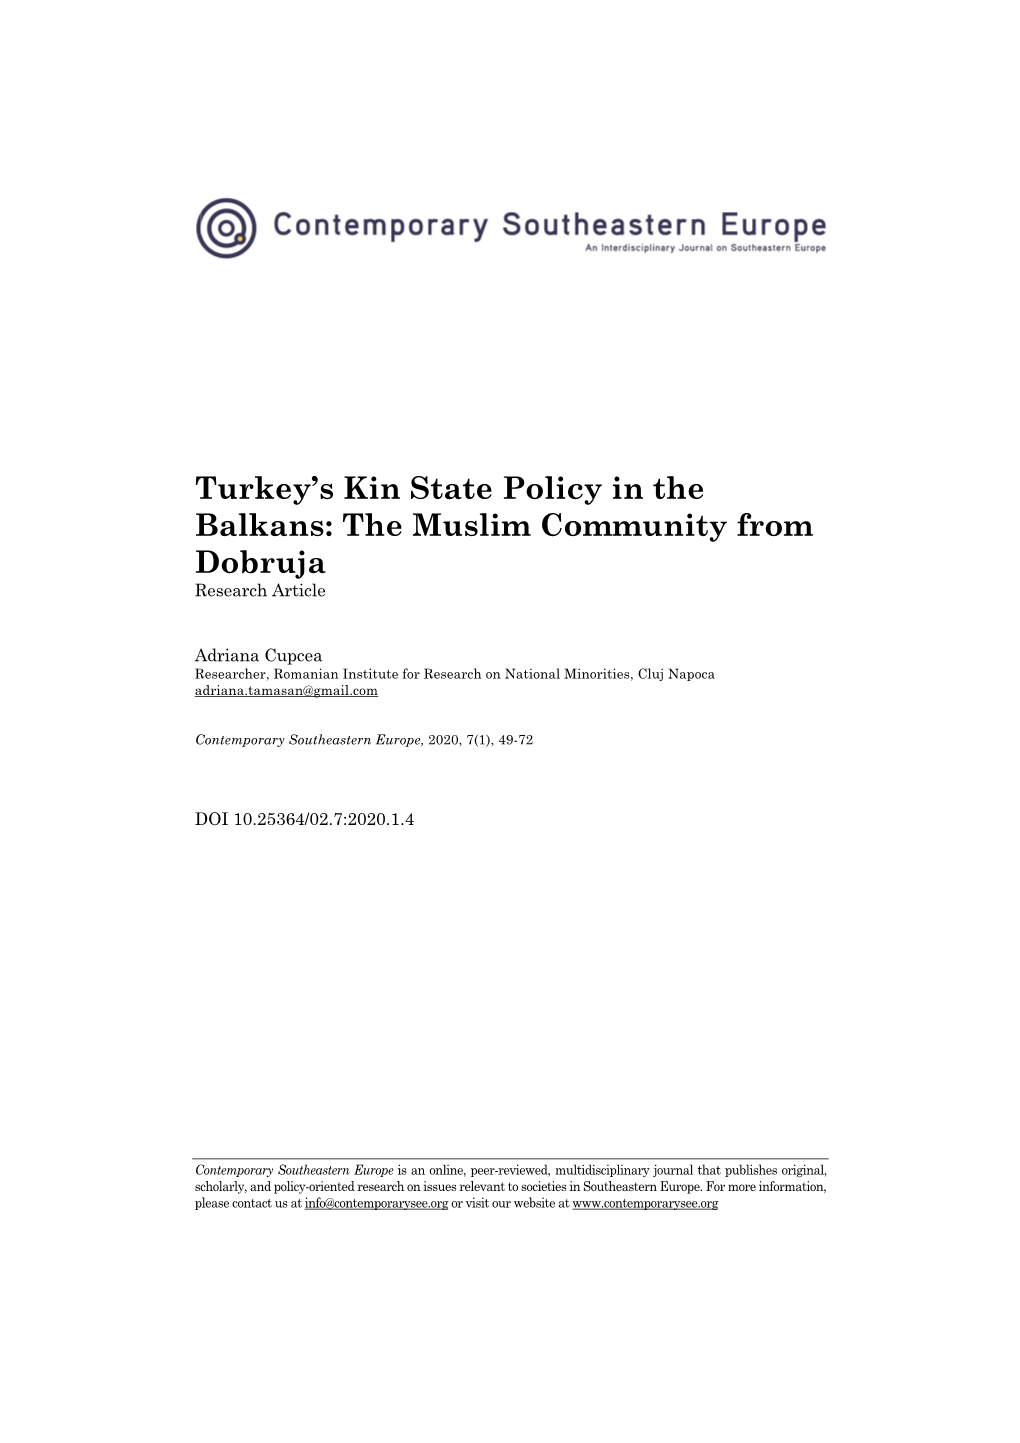 Turkey's Kin State Policy in the Balkans: the Muslim Community